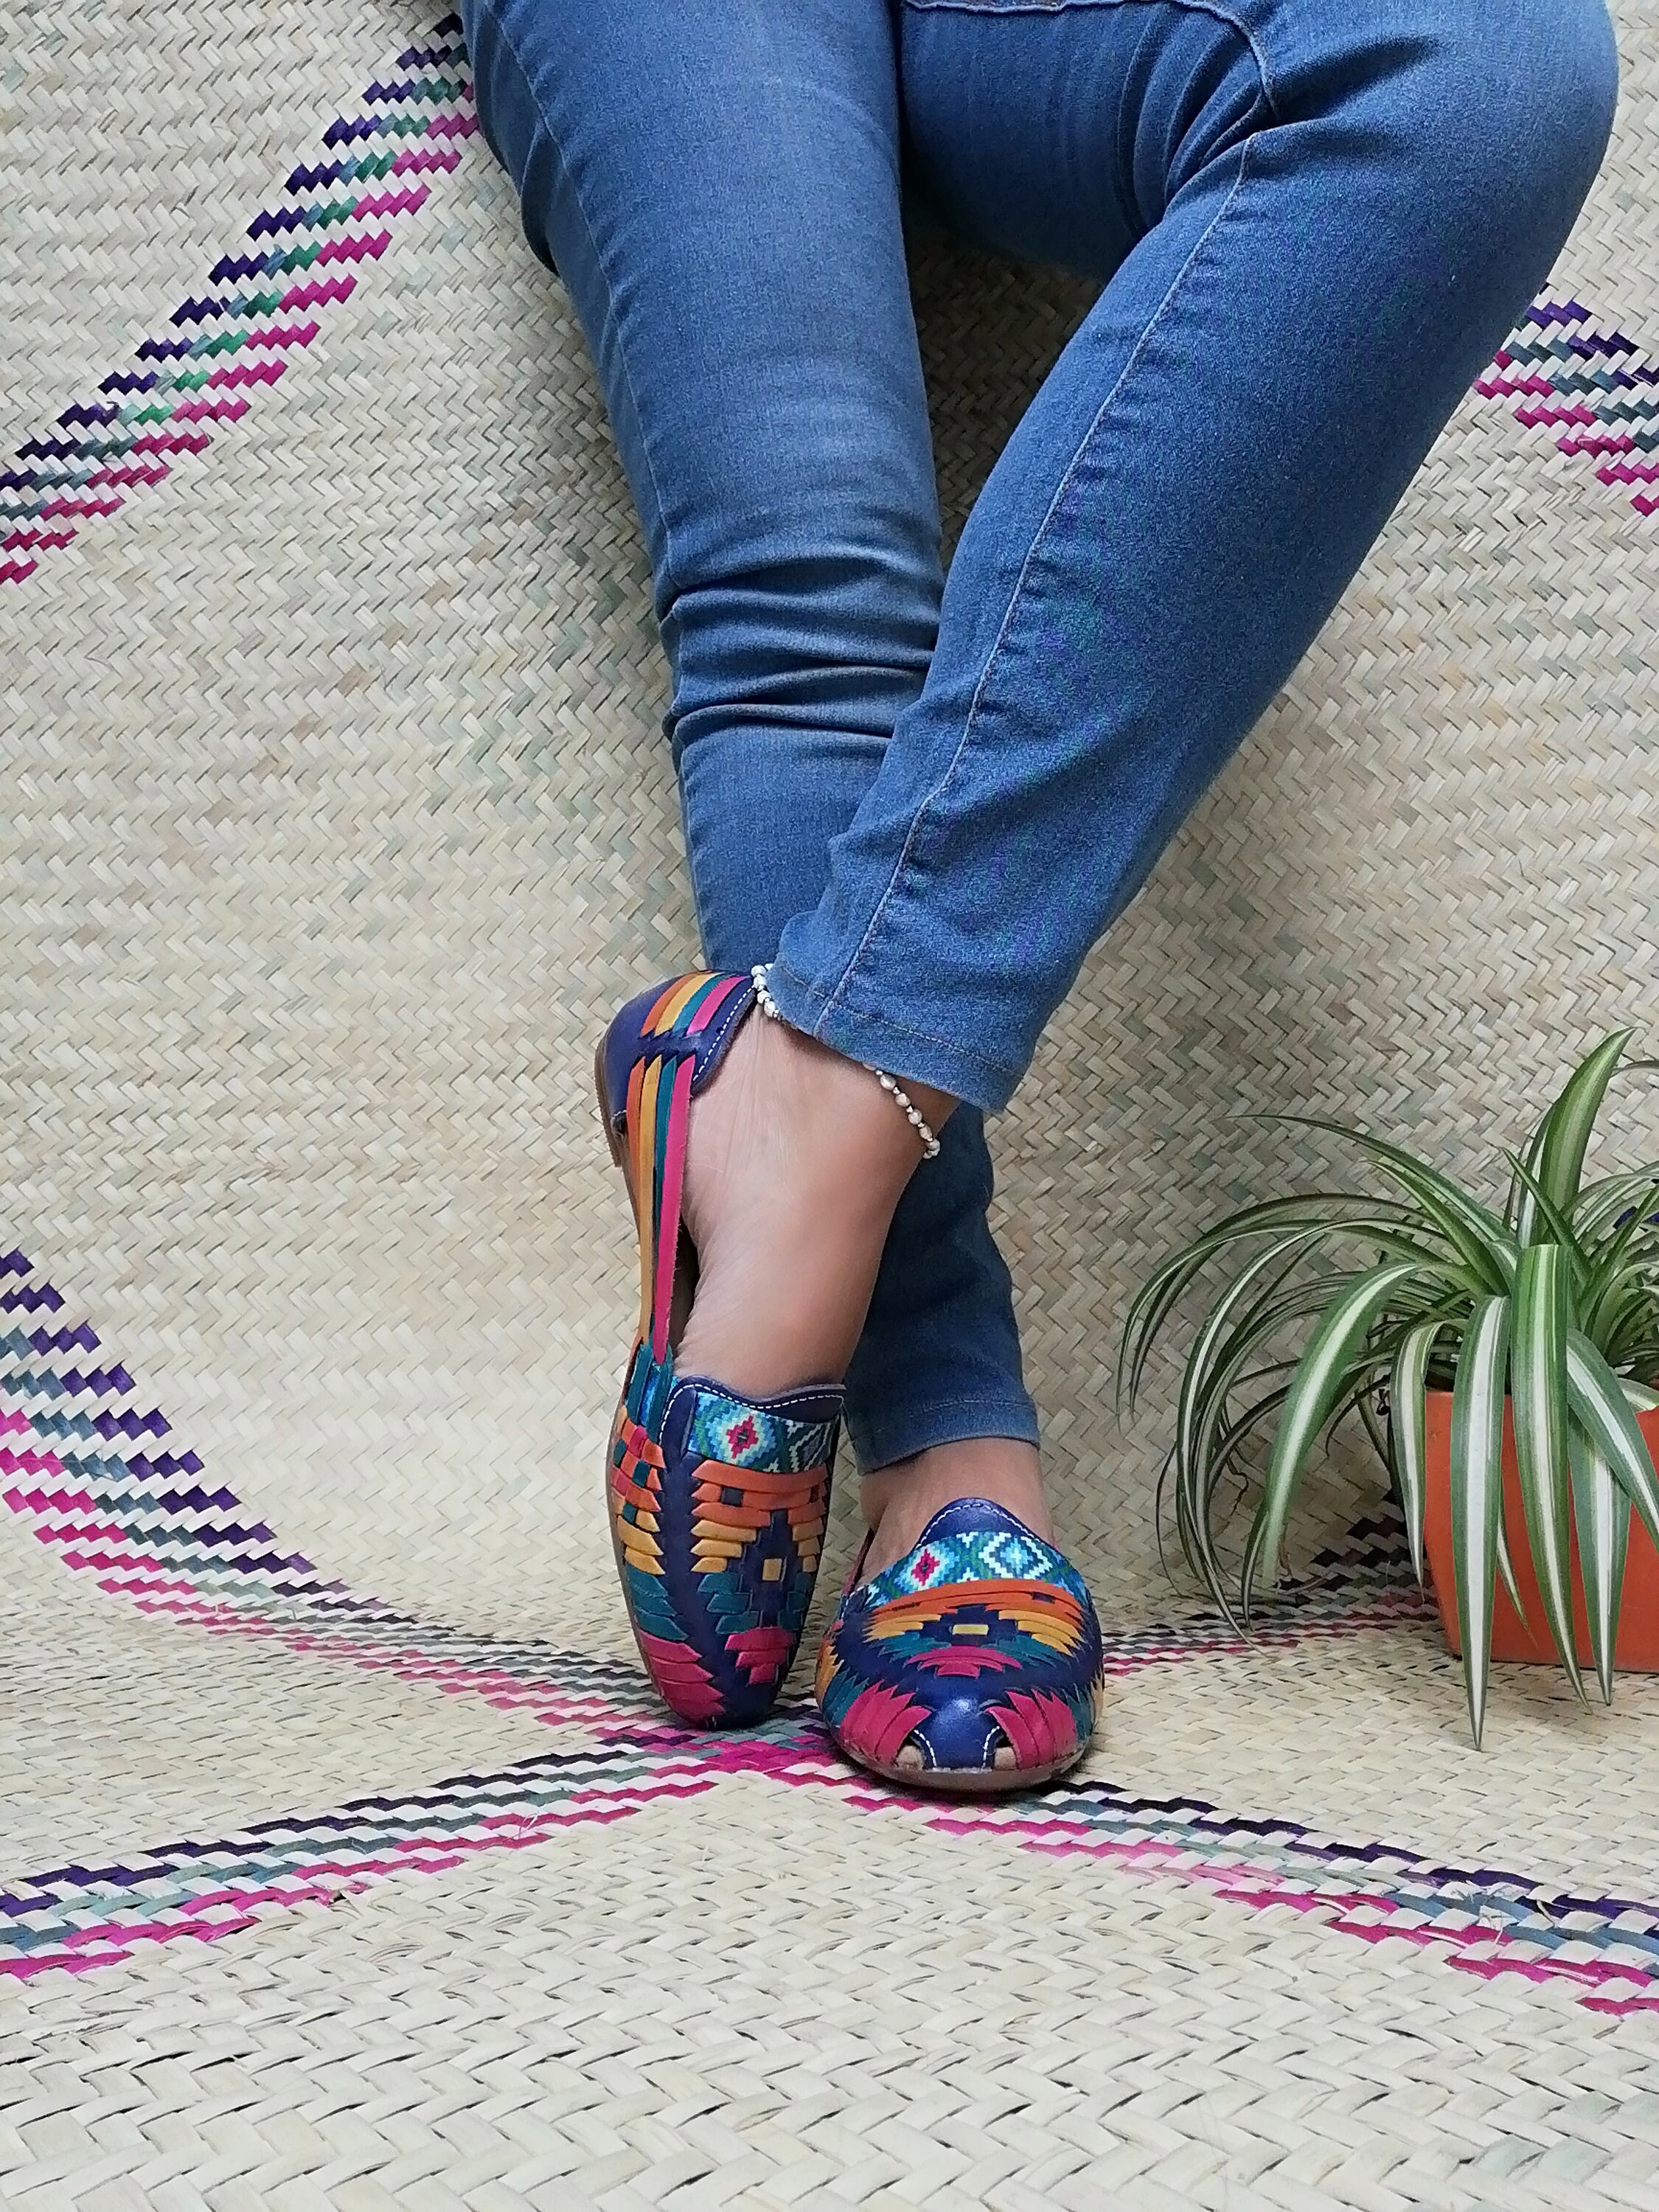 Mexican women handmade leather sandals huaraches all size | Etsy